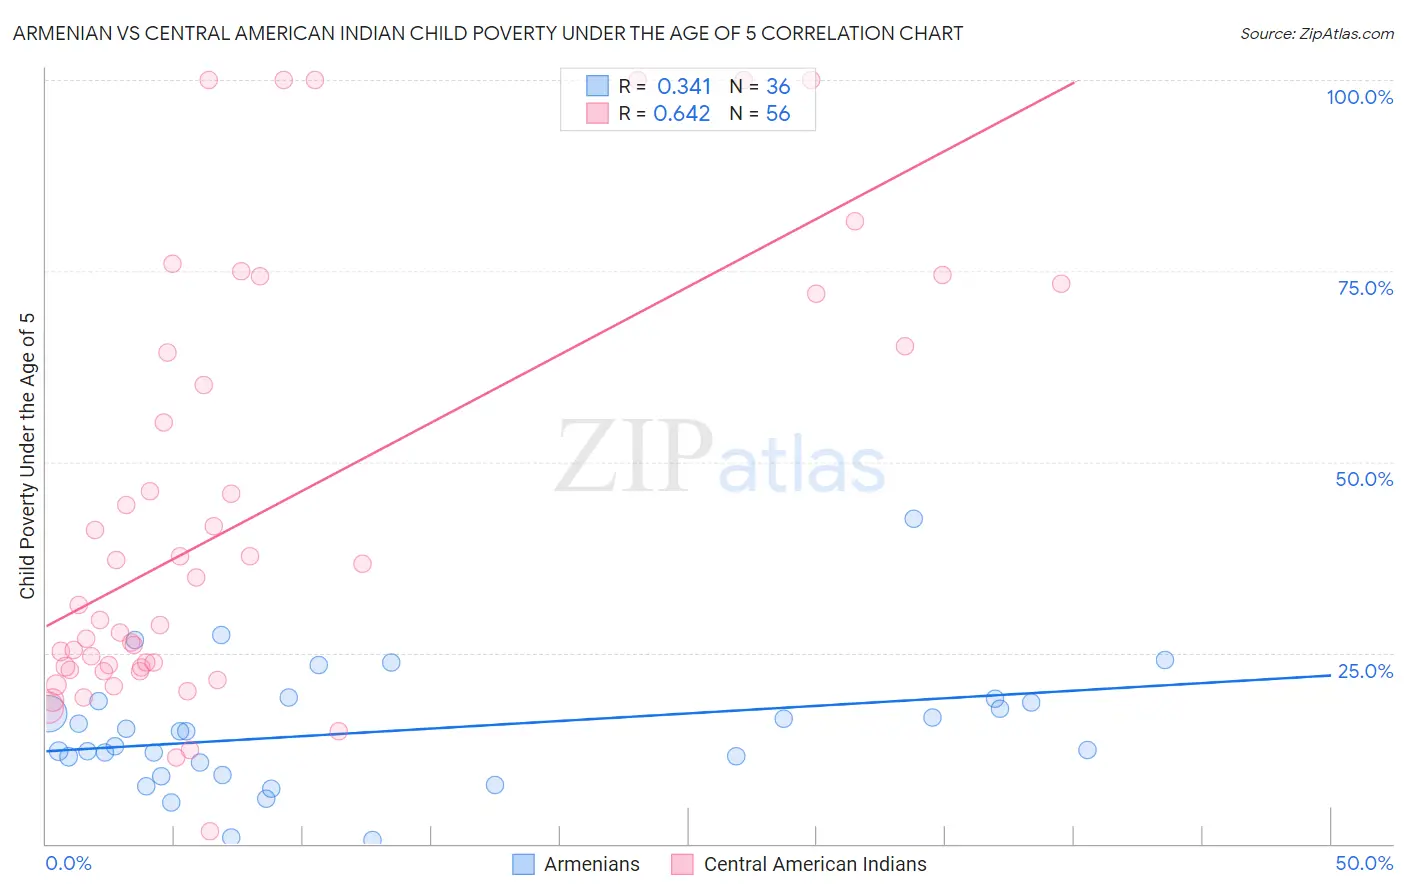 Armenian vs Central American Indian Child Poverty Under the Age of 5